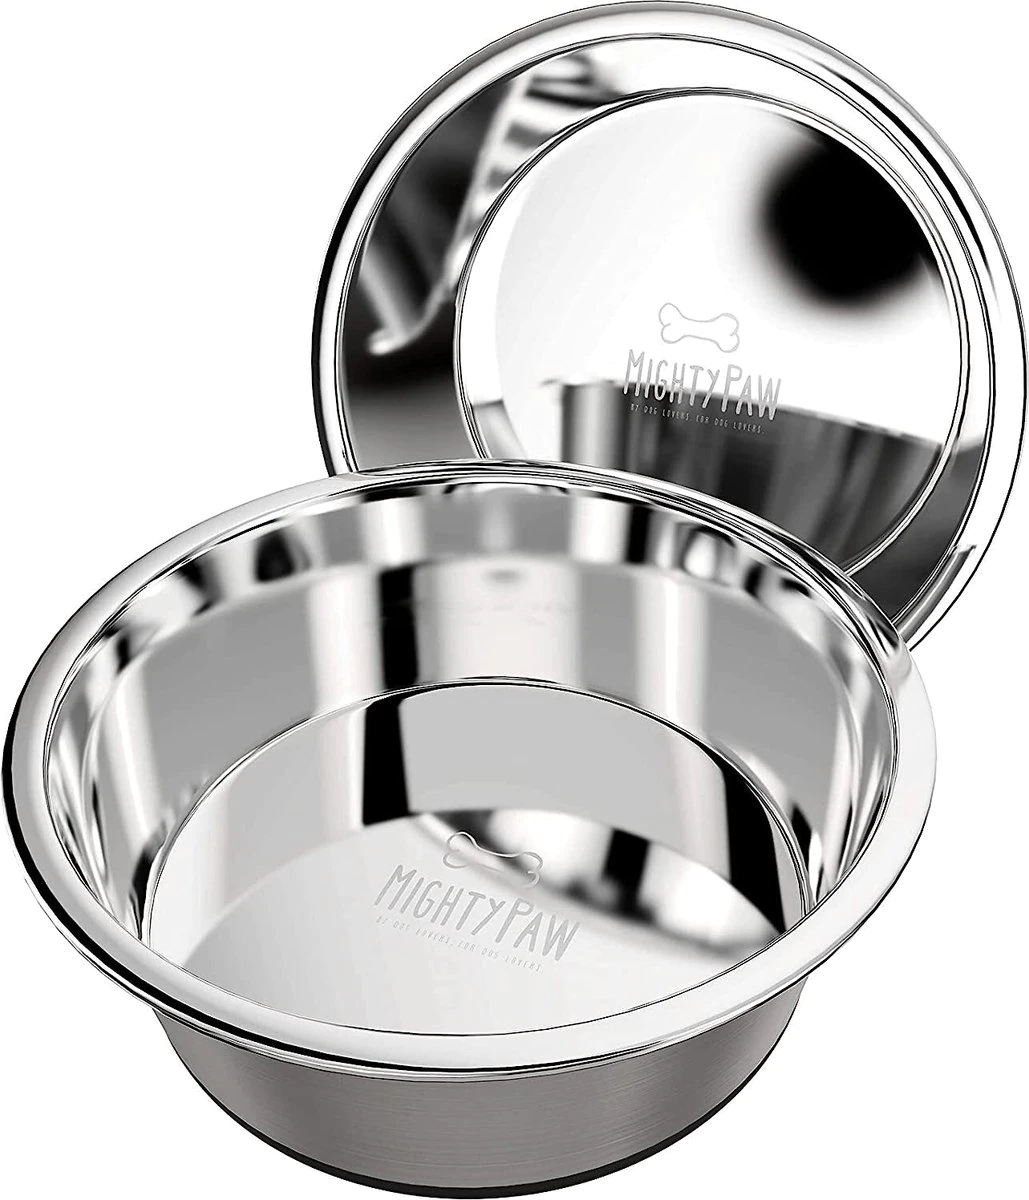 Mighty Paw Stainless Steel Dog Bowl